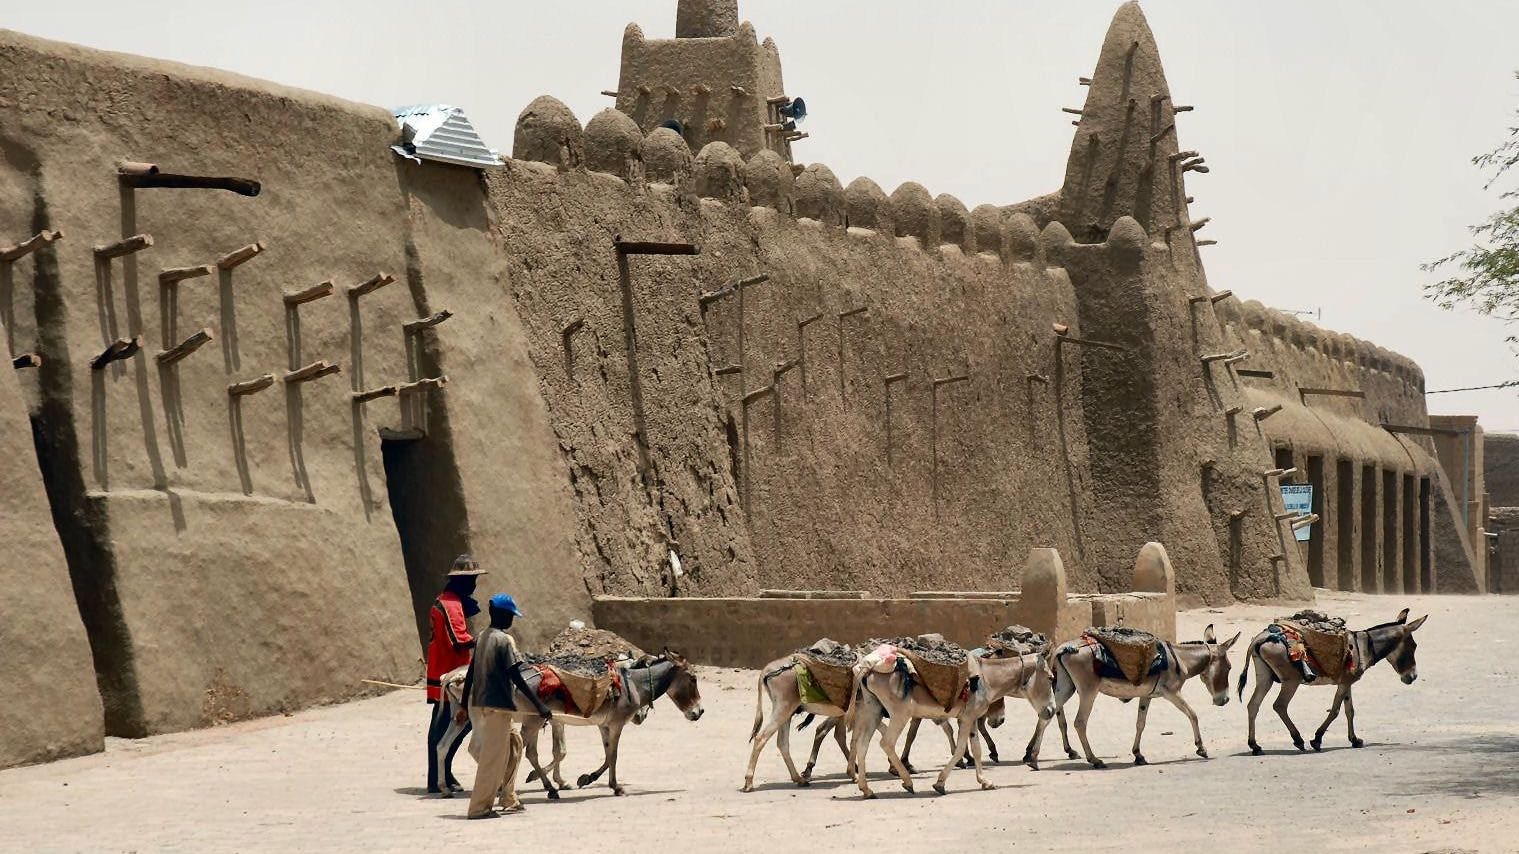 Image: Men walking with donkeys in front of a building in Kimbuktu